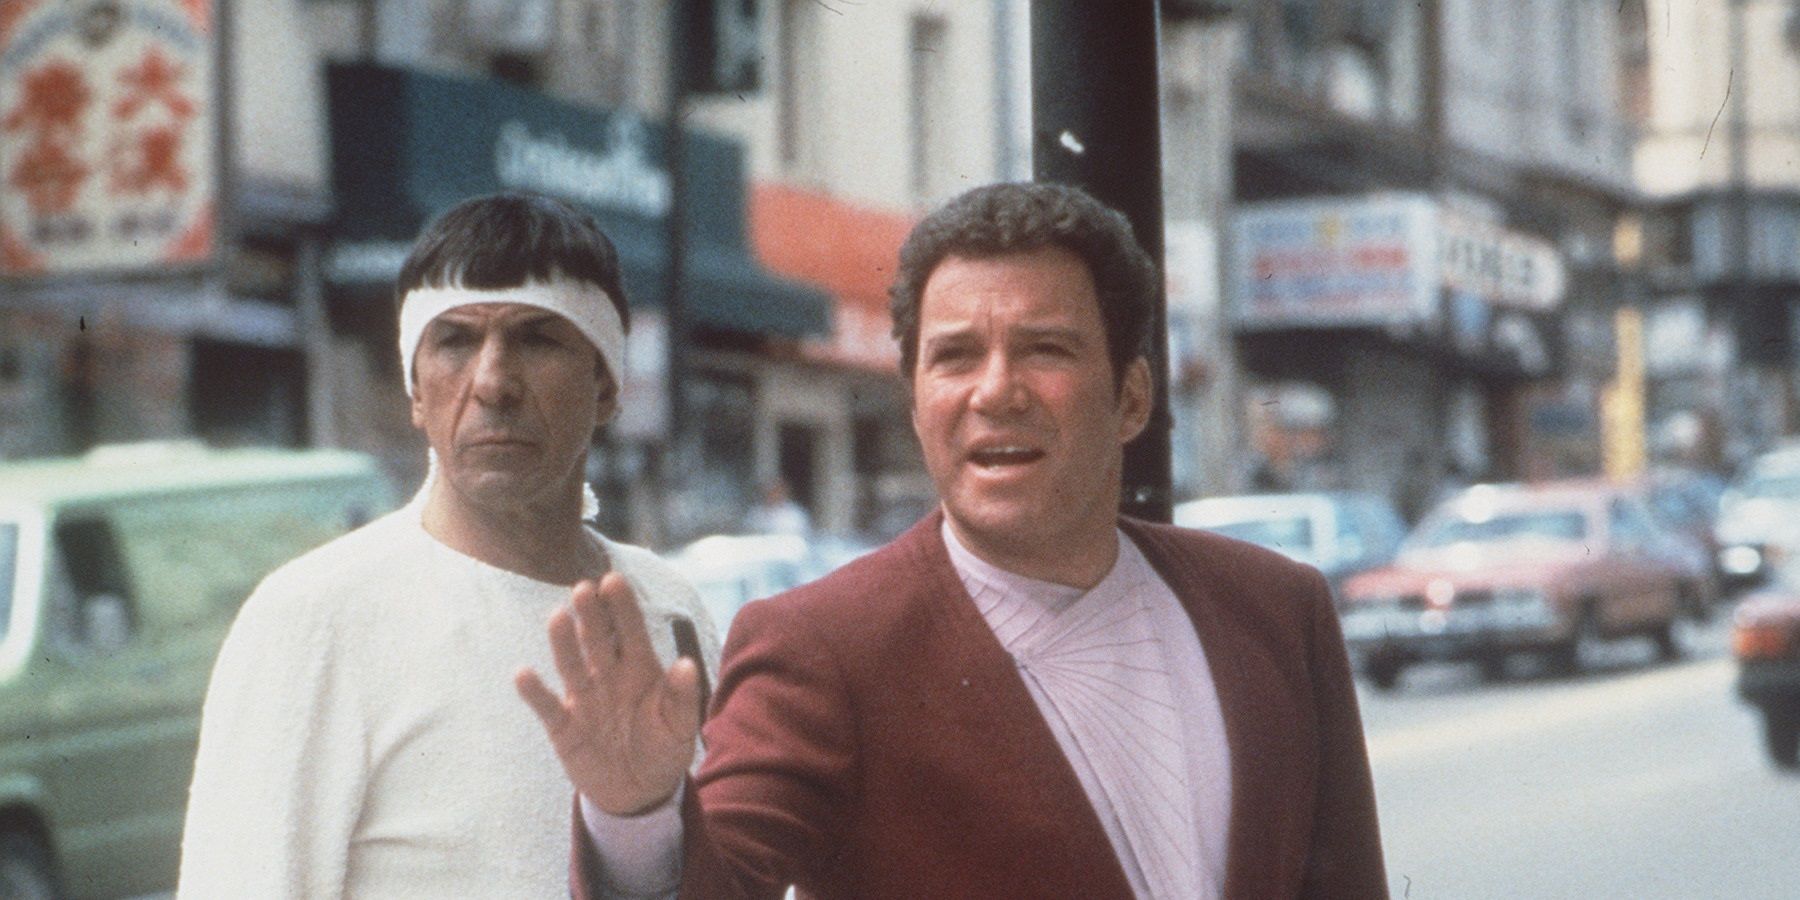 Kirk and Spock stand on the street in Star Trek IV